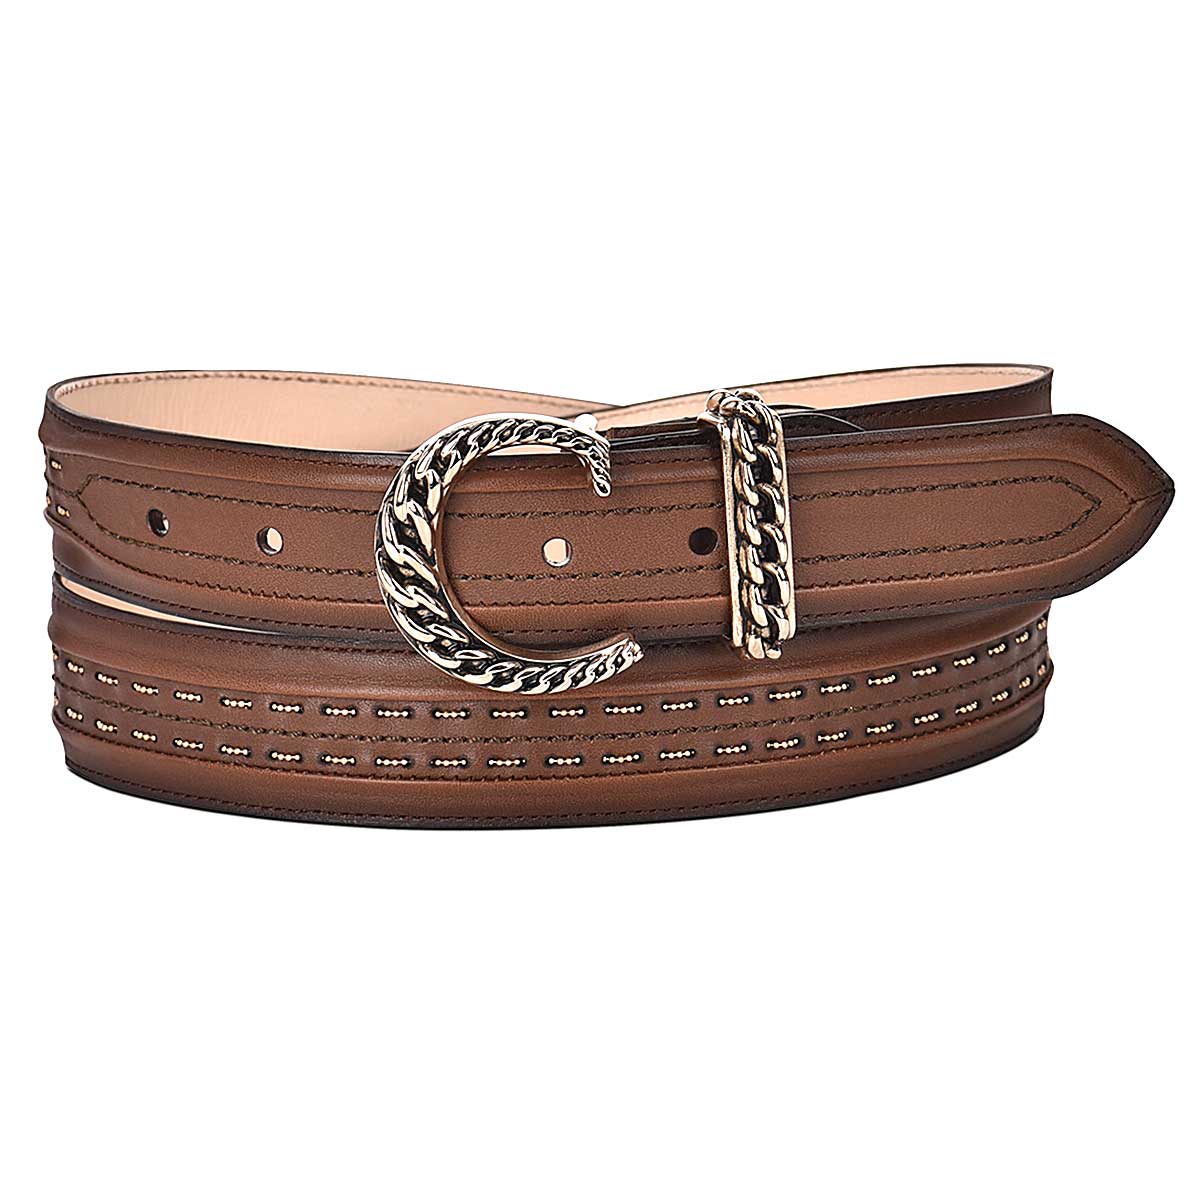 Honey leather traditional belt, Handwoven, for women - CD984RS - Cuadra Shop